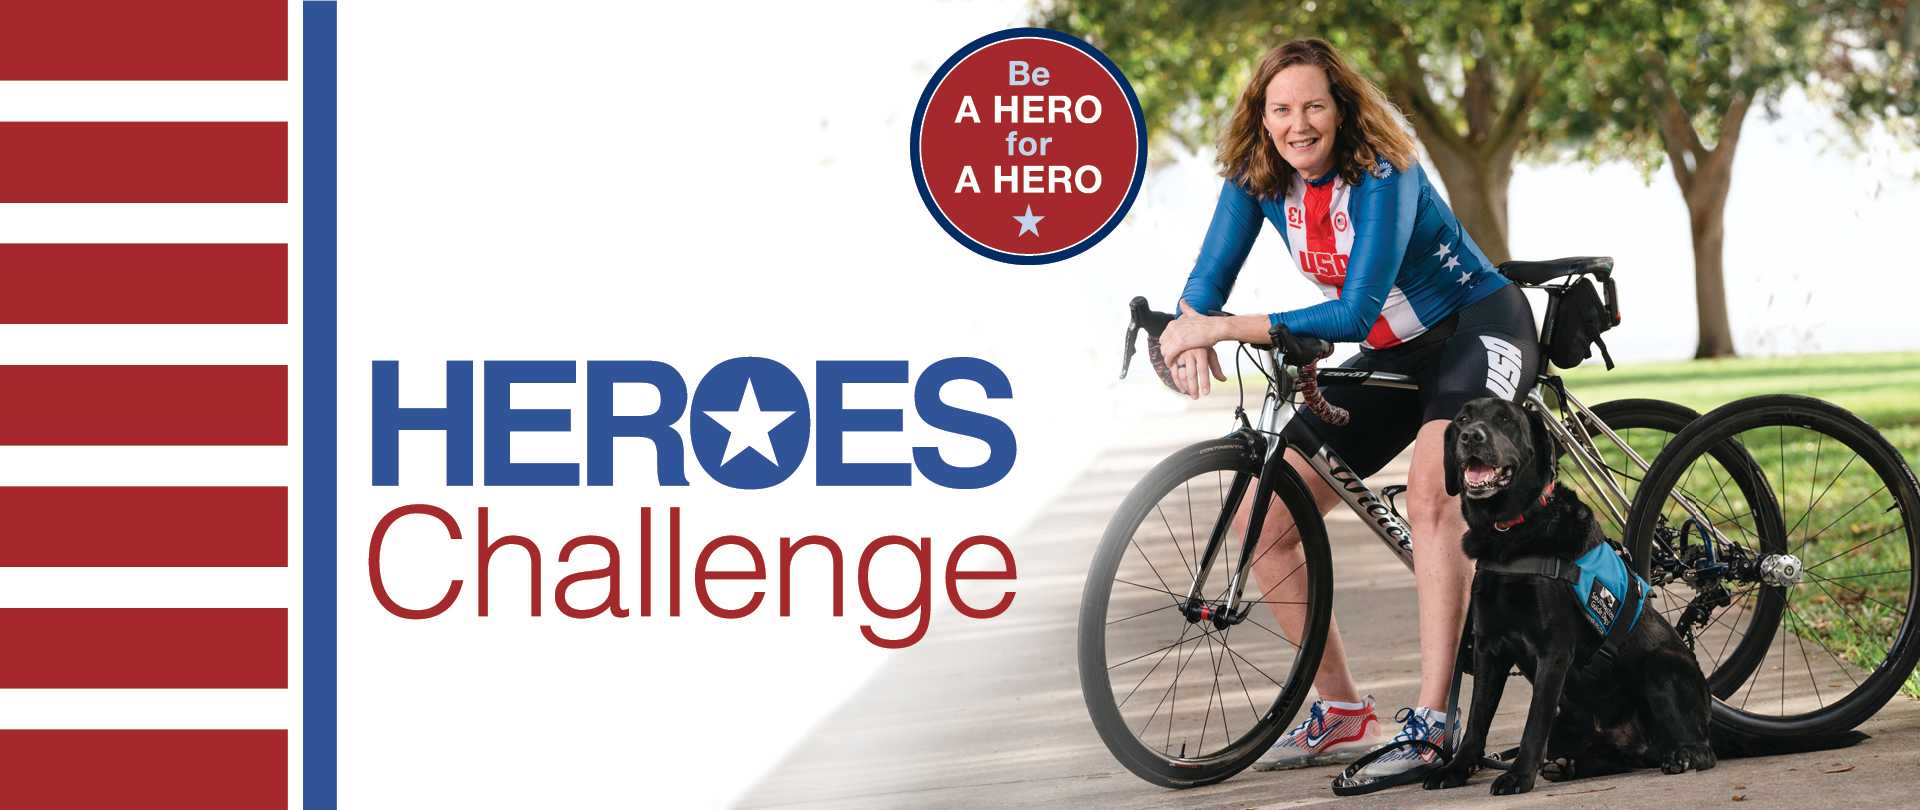 Heroes Challenge Slider Image of a woman on a bike next to a service dog.